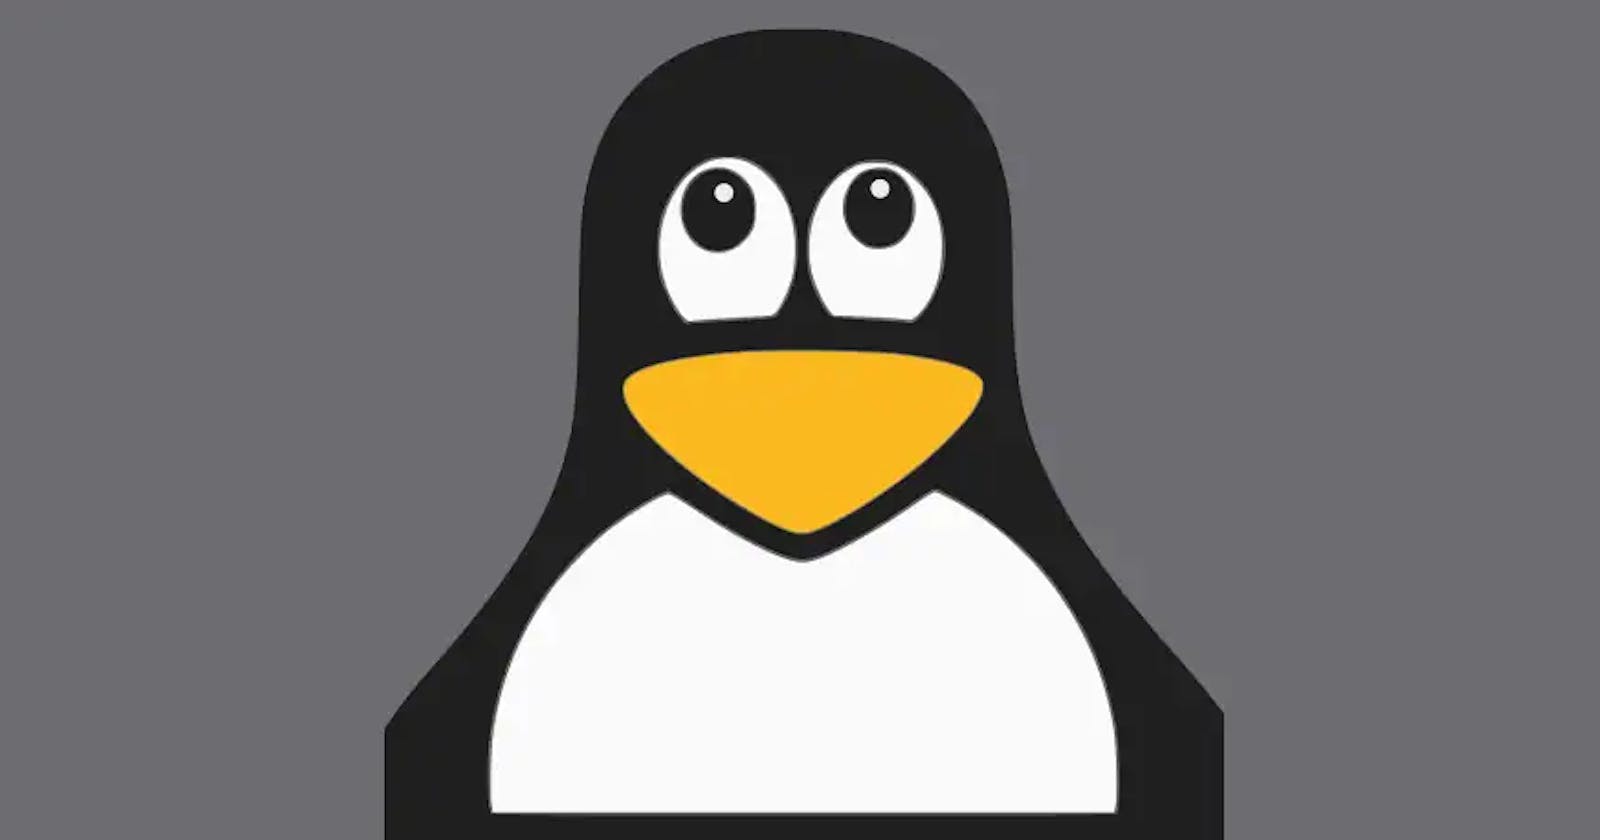 Get Ahead of the Curve: Top 5 Linux Distros to Try in 2023